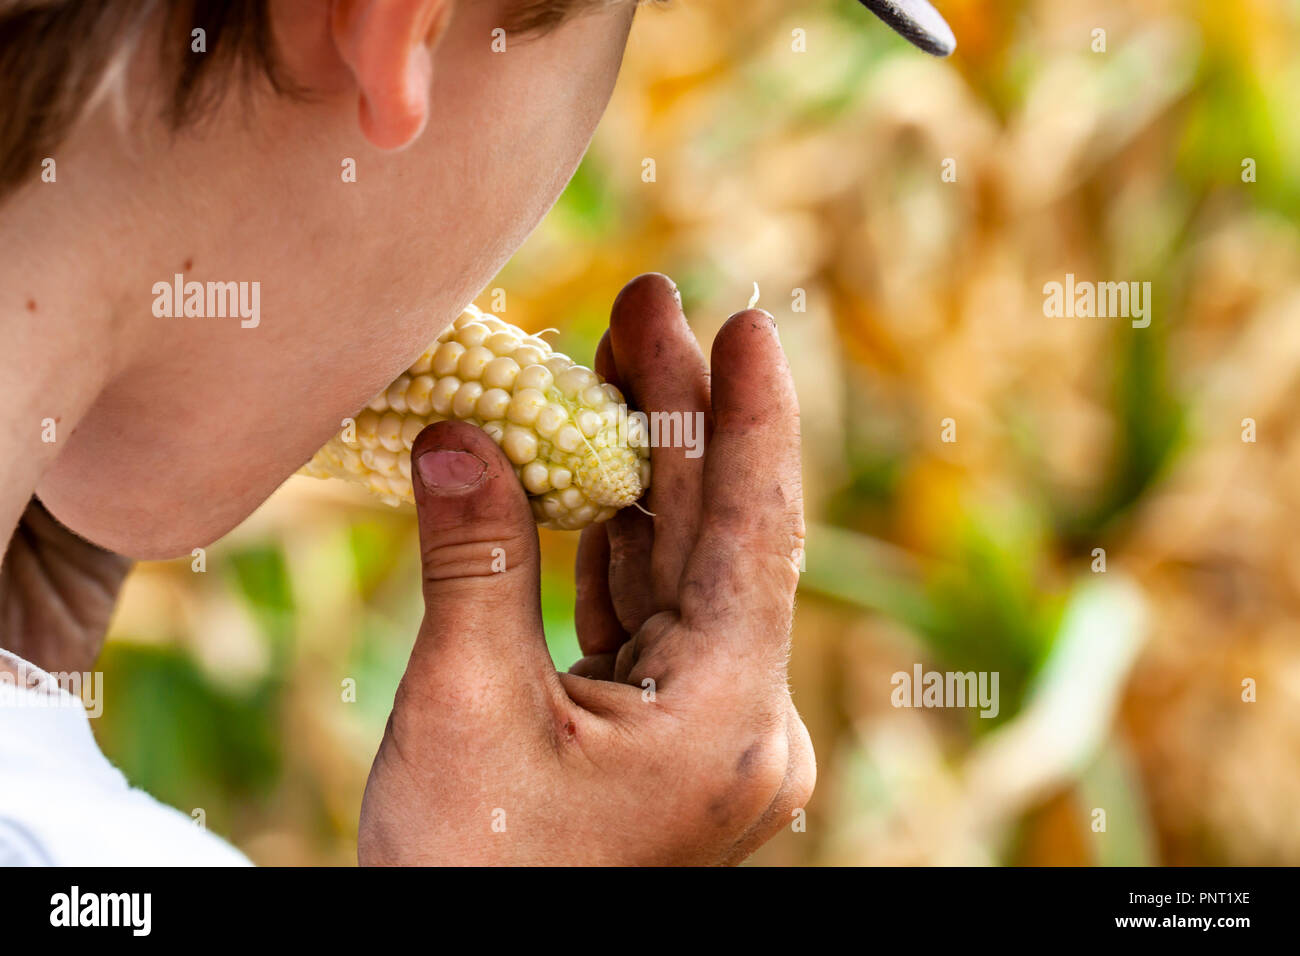 Boy with dirty hands eating a corncob in the field. Stock Photo